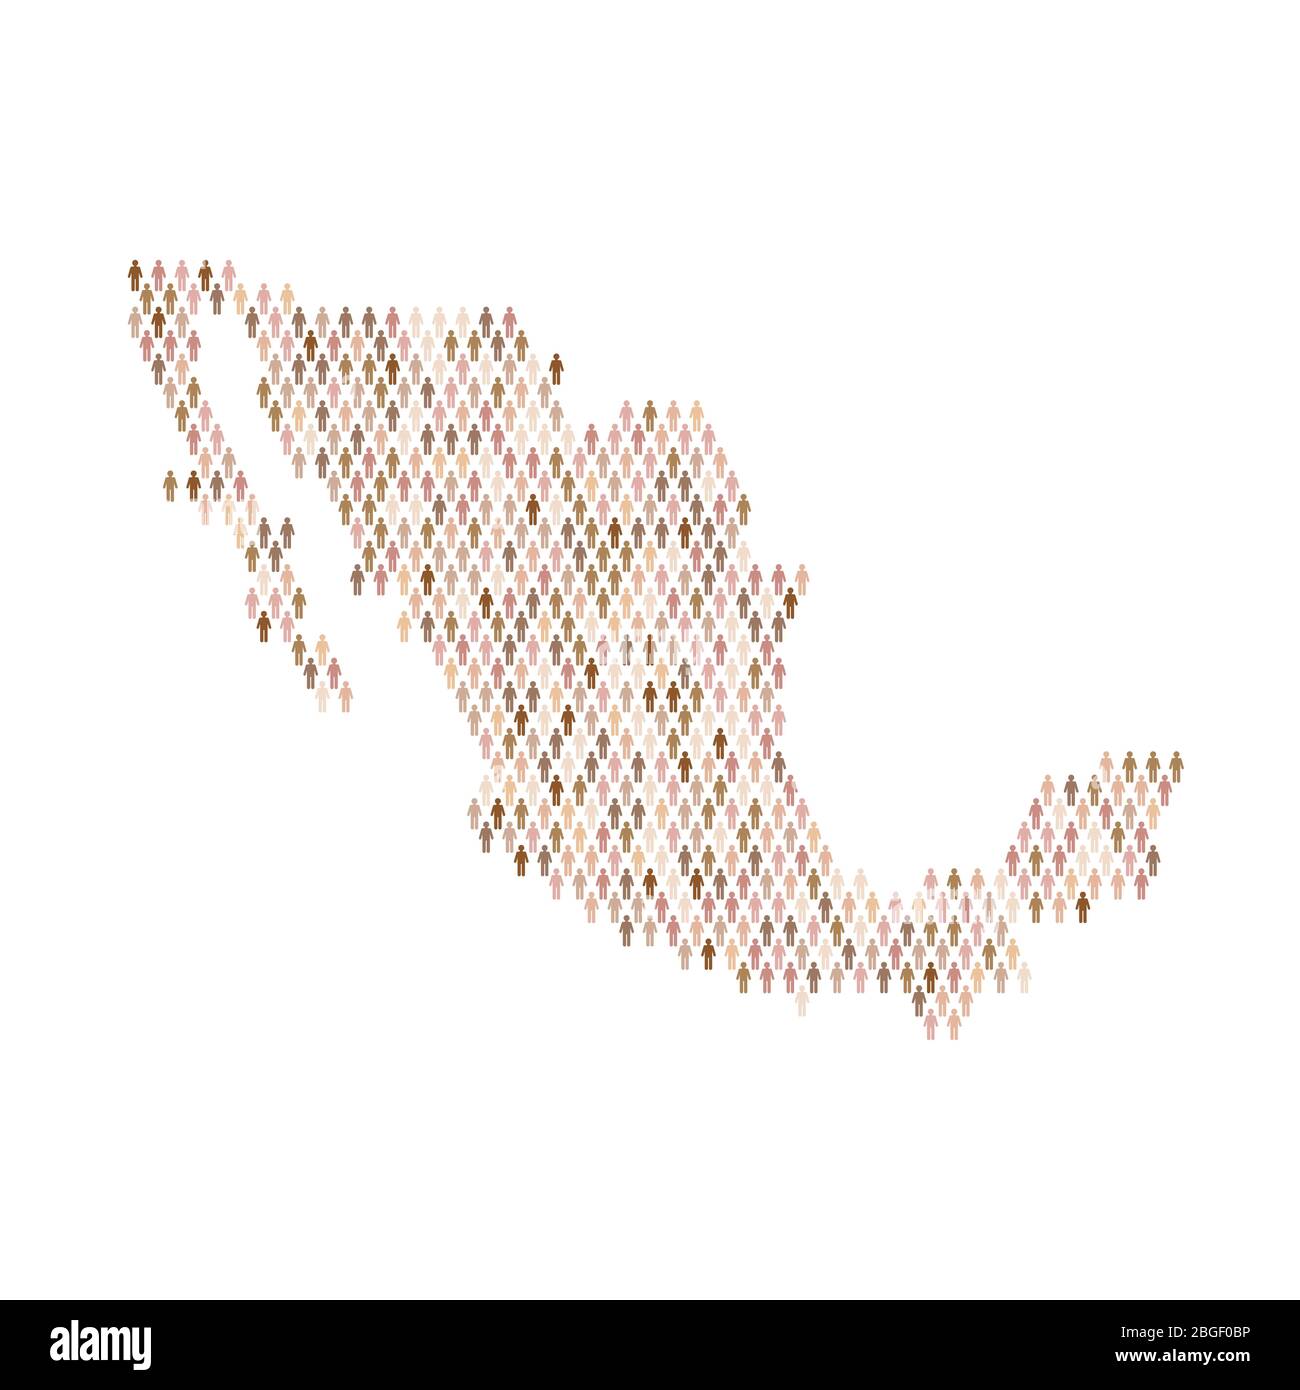 Mexico population infographic. Map made from stick figure people Stock Vector